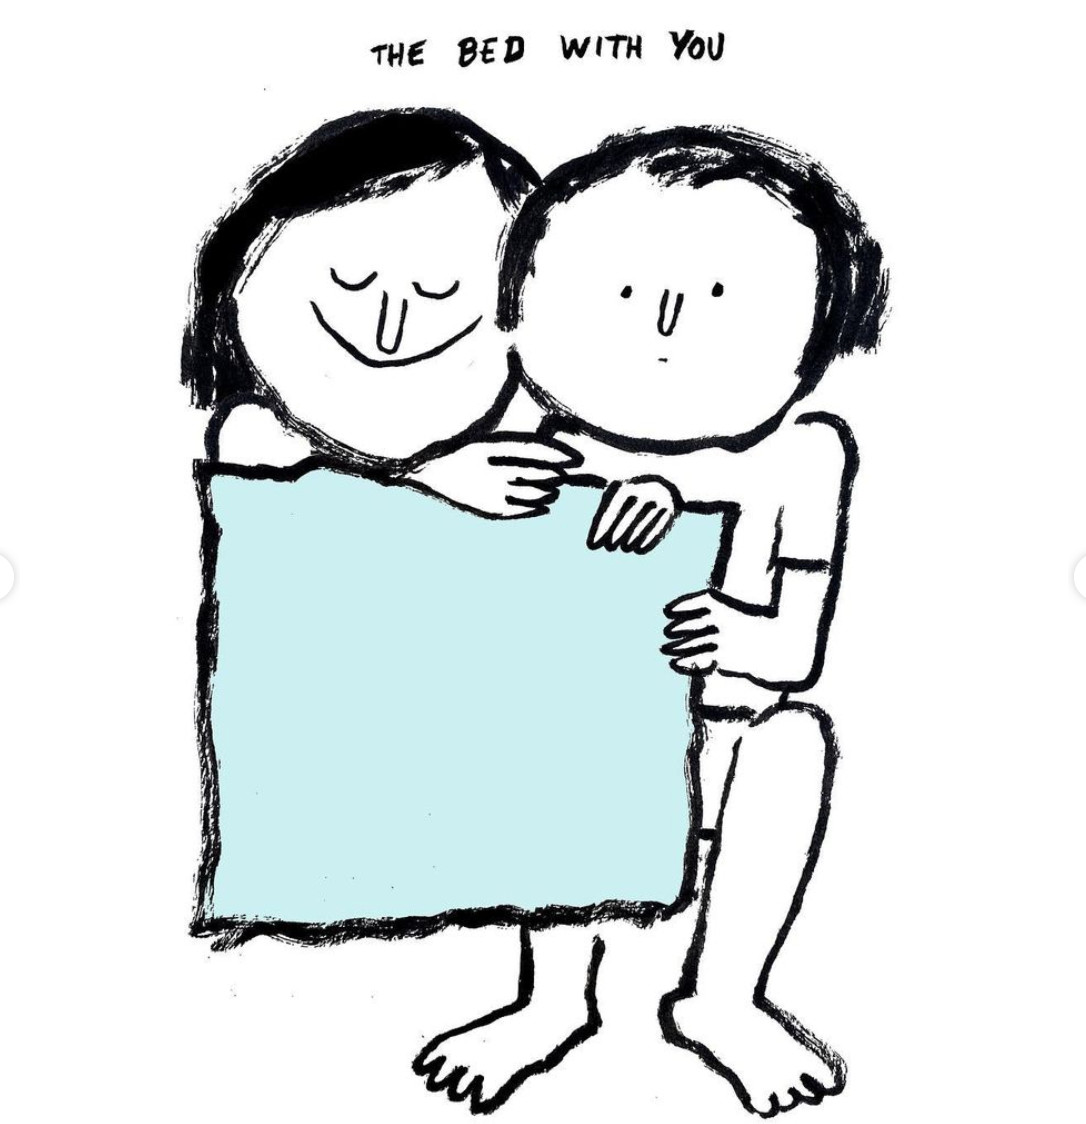 The bed with you, by Jean Jullien. Image courtesy of Jullien's Instagram